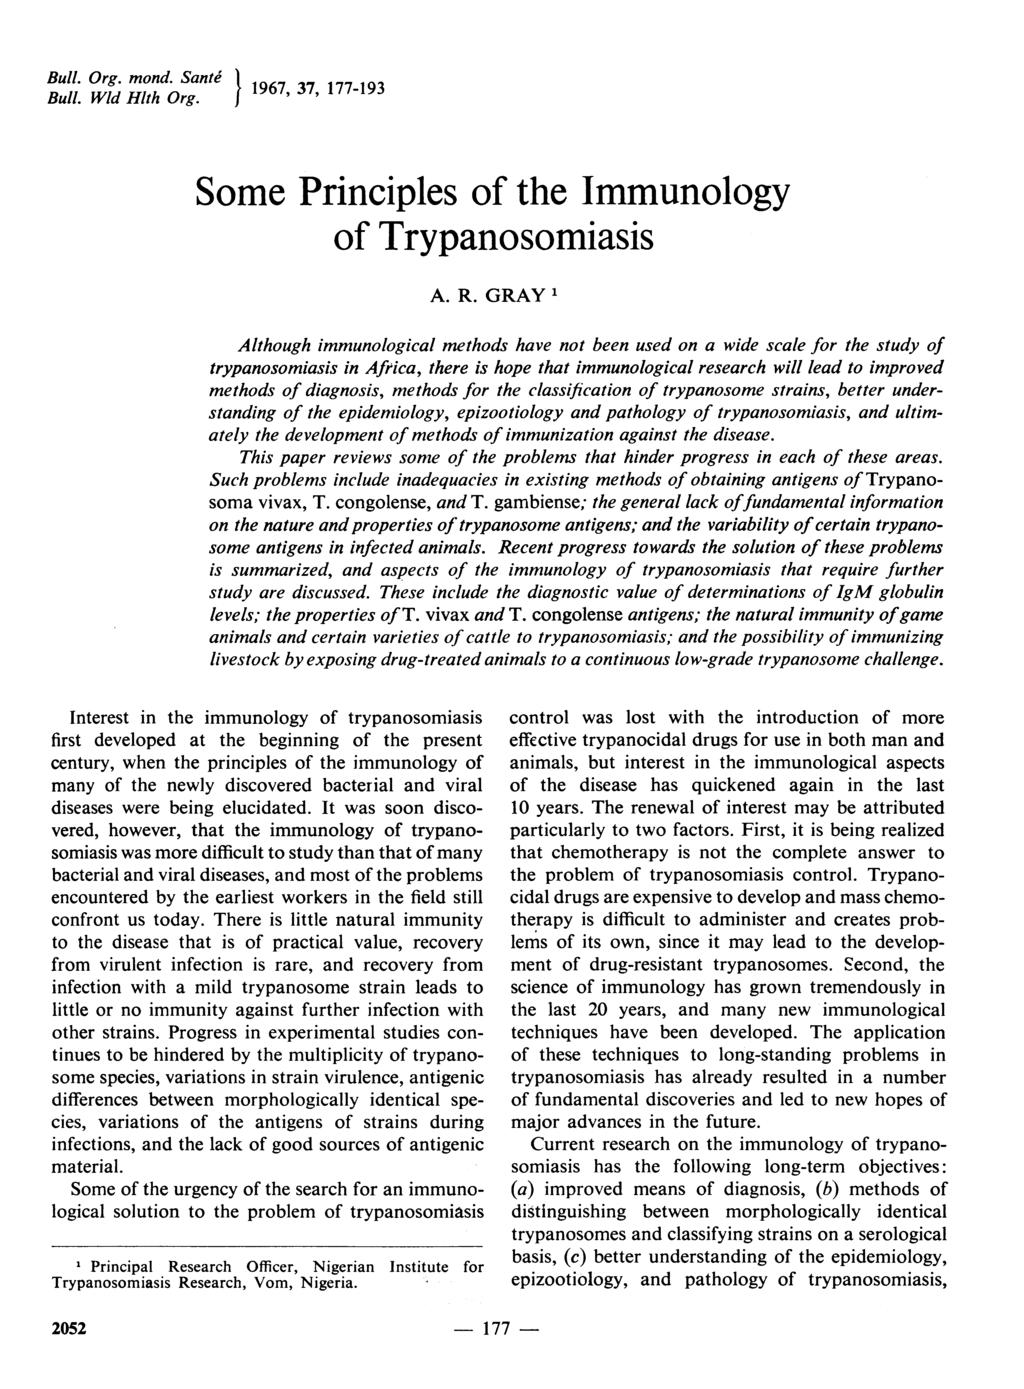 Bull. Org. mond. Sante 1 1967, 37, 177-193 Bull. Wld Hlth Org. J Some Principles of the Immunology of Trypanosomiasis A. R.